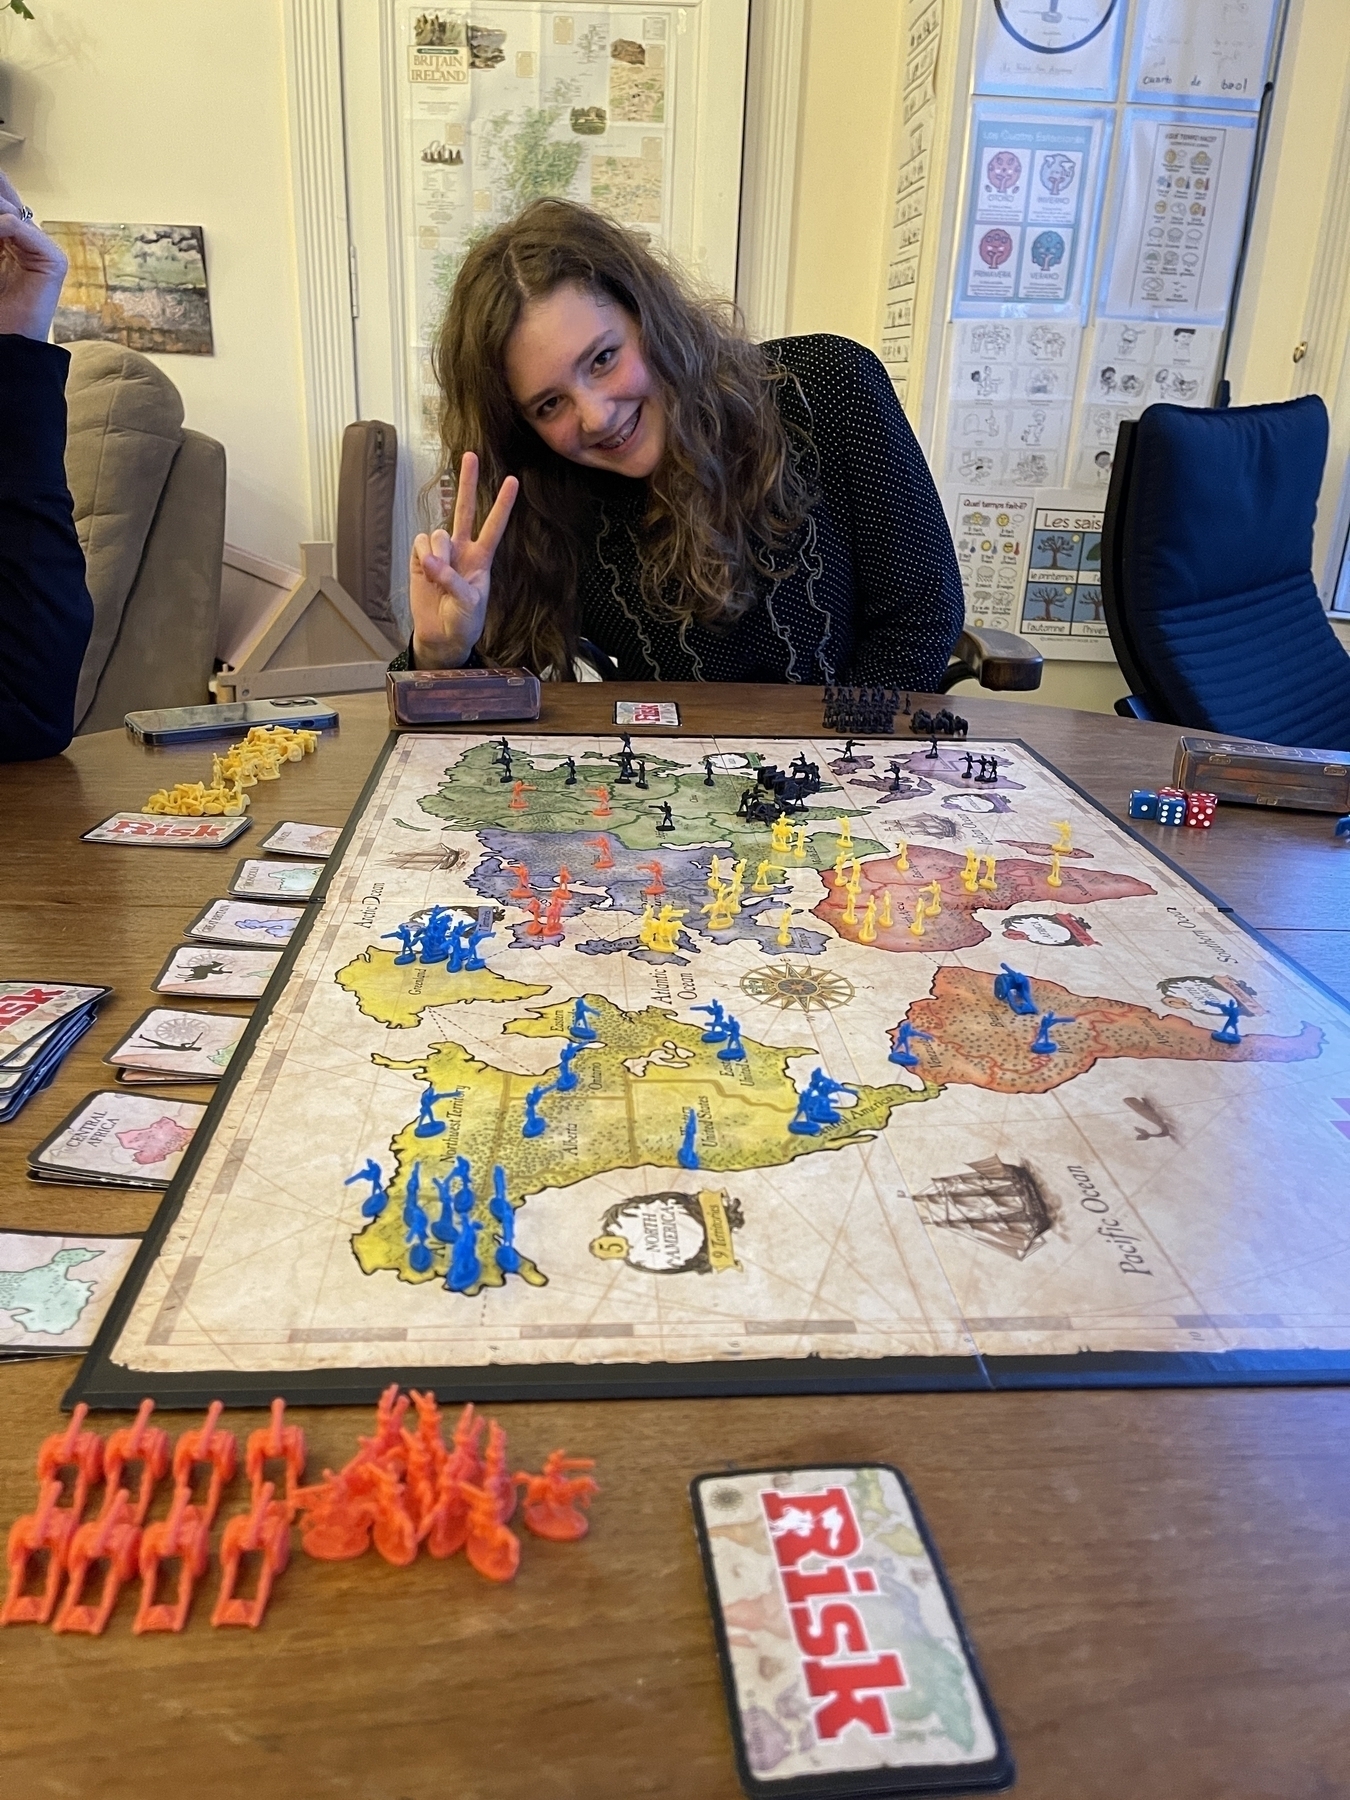 My orange armies surrounded on a risk board, with my ruthless oppressor/daughter making a peace sign in the background.